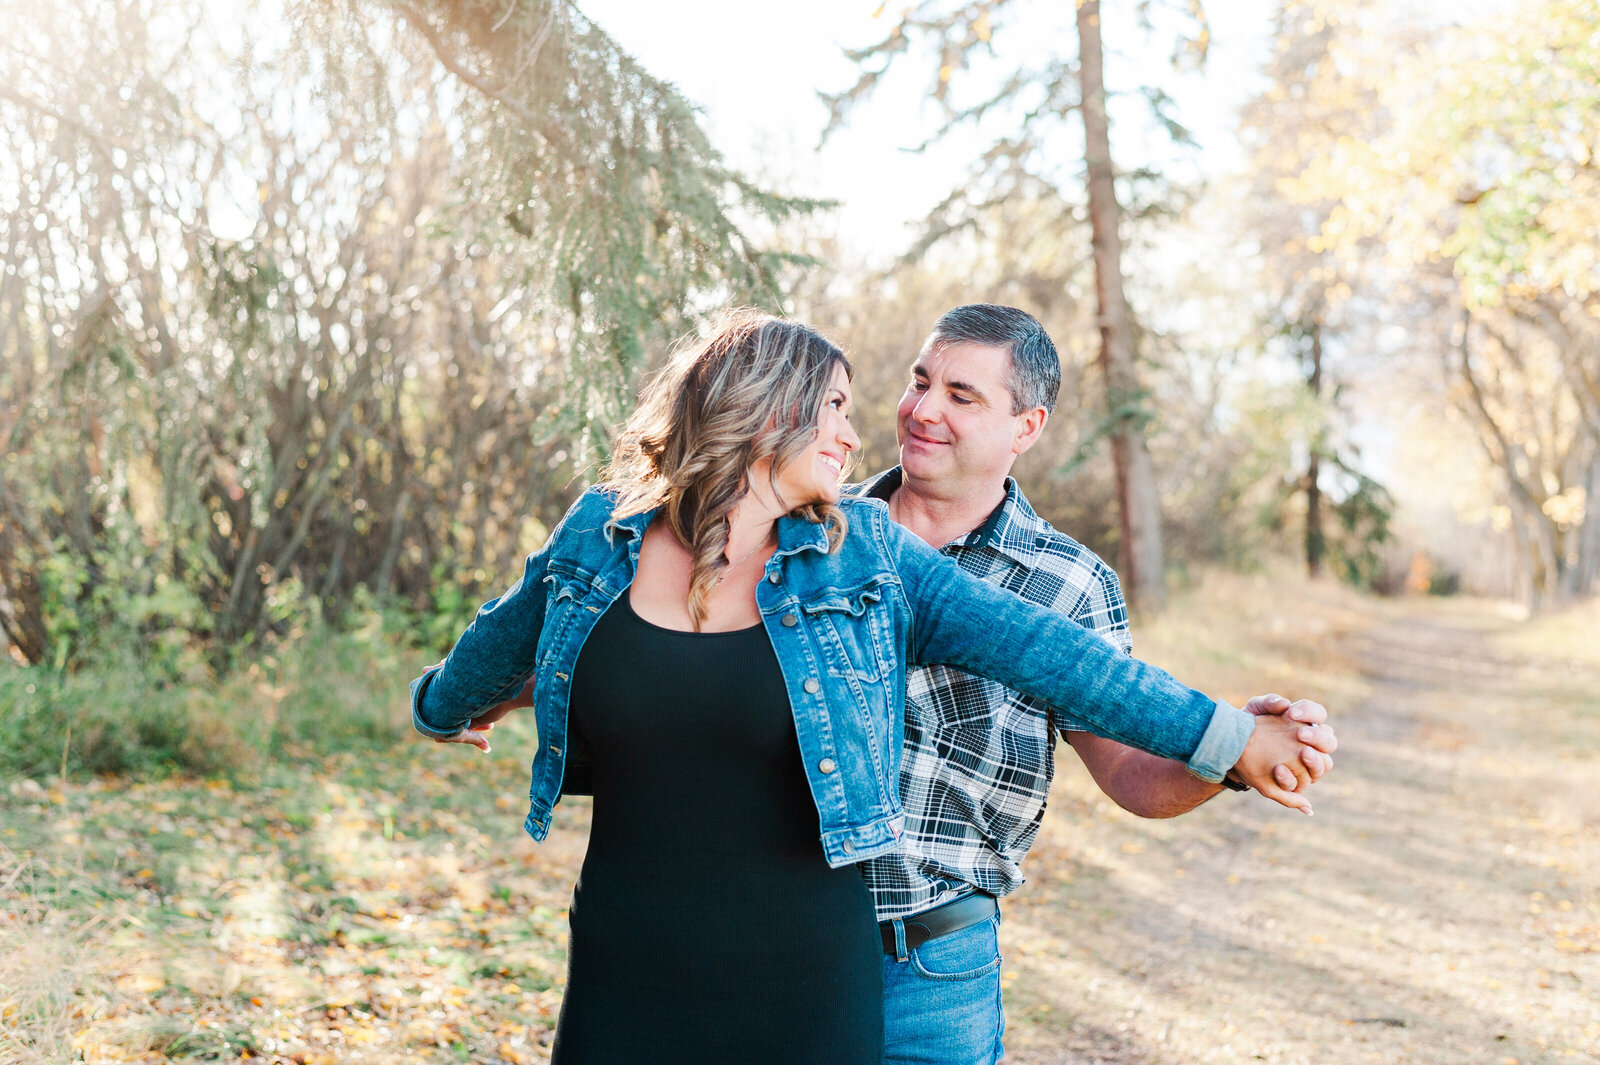 Engagement Photos Included in Wedding Photography Packages